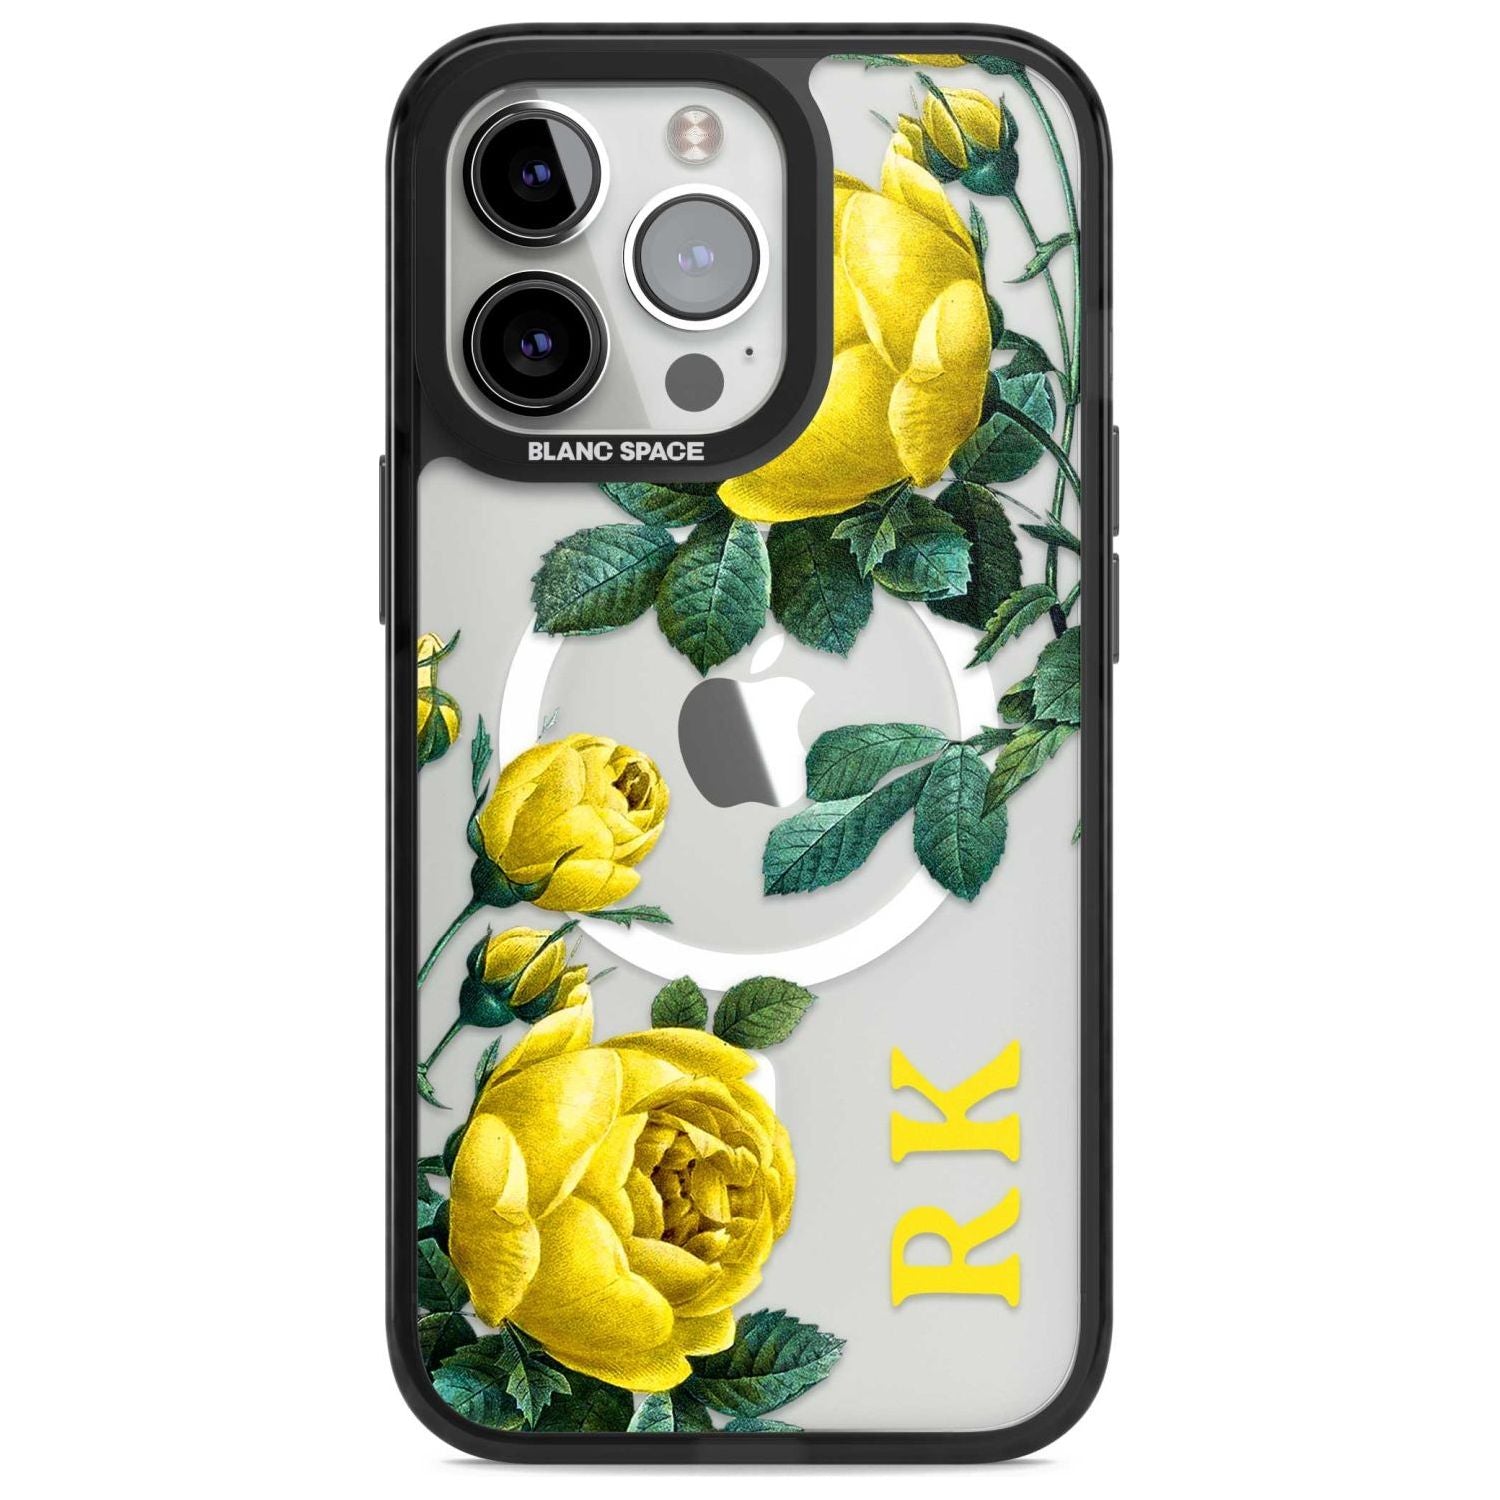 Personalised Clear Vintage Floral Yellow Roses Custom Phone Case iPhone 15 Pro Max / Magsafe Black Impact Case,iPhone 15 Pro / Magsafe Black Impact Case,iPhone 14 Pro Max / Magsafe Black Impact Case,iPhone 14 Pro / Magsafe Black Impact Case,iPhone 13 Pro / Magsafe Black Impact Case Blanc Space